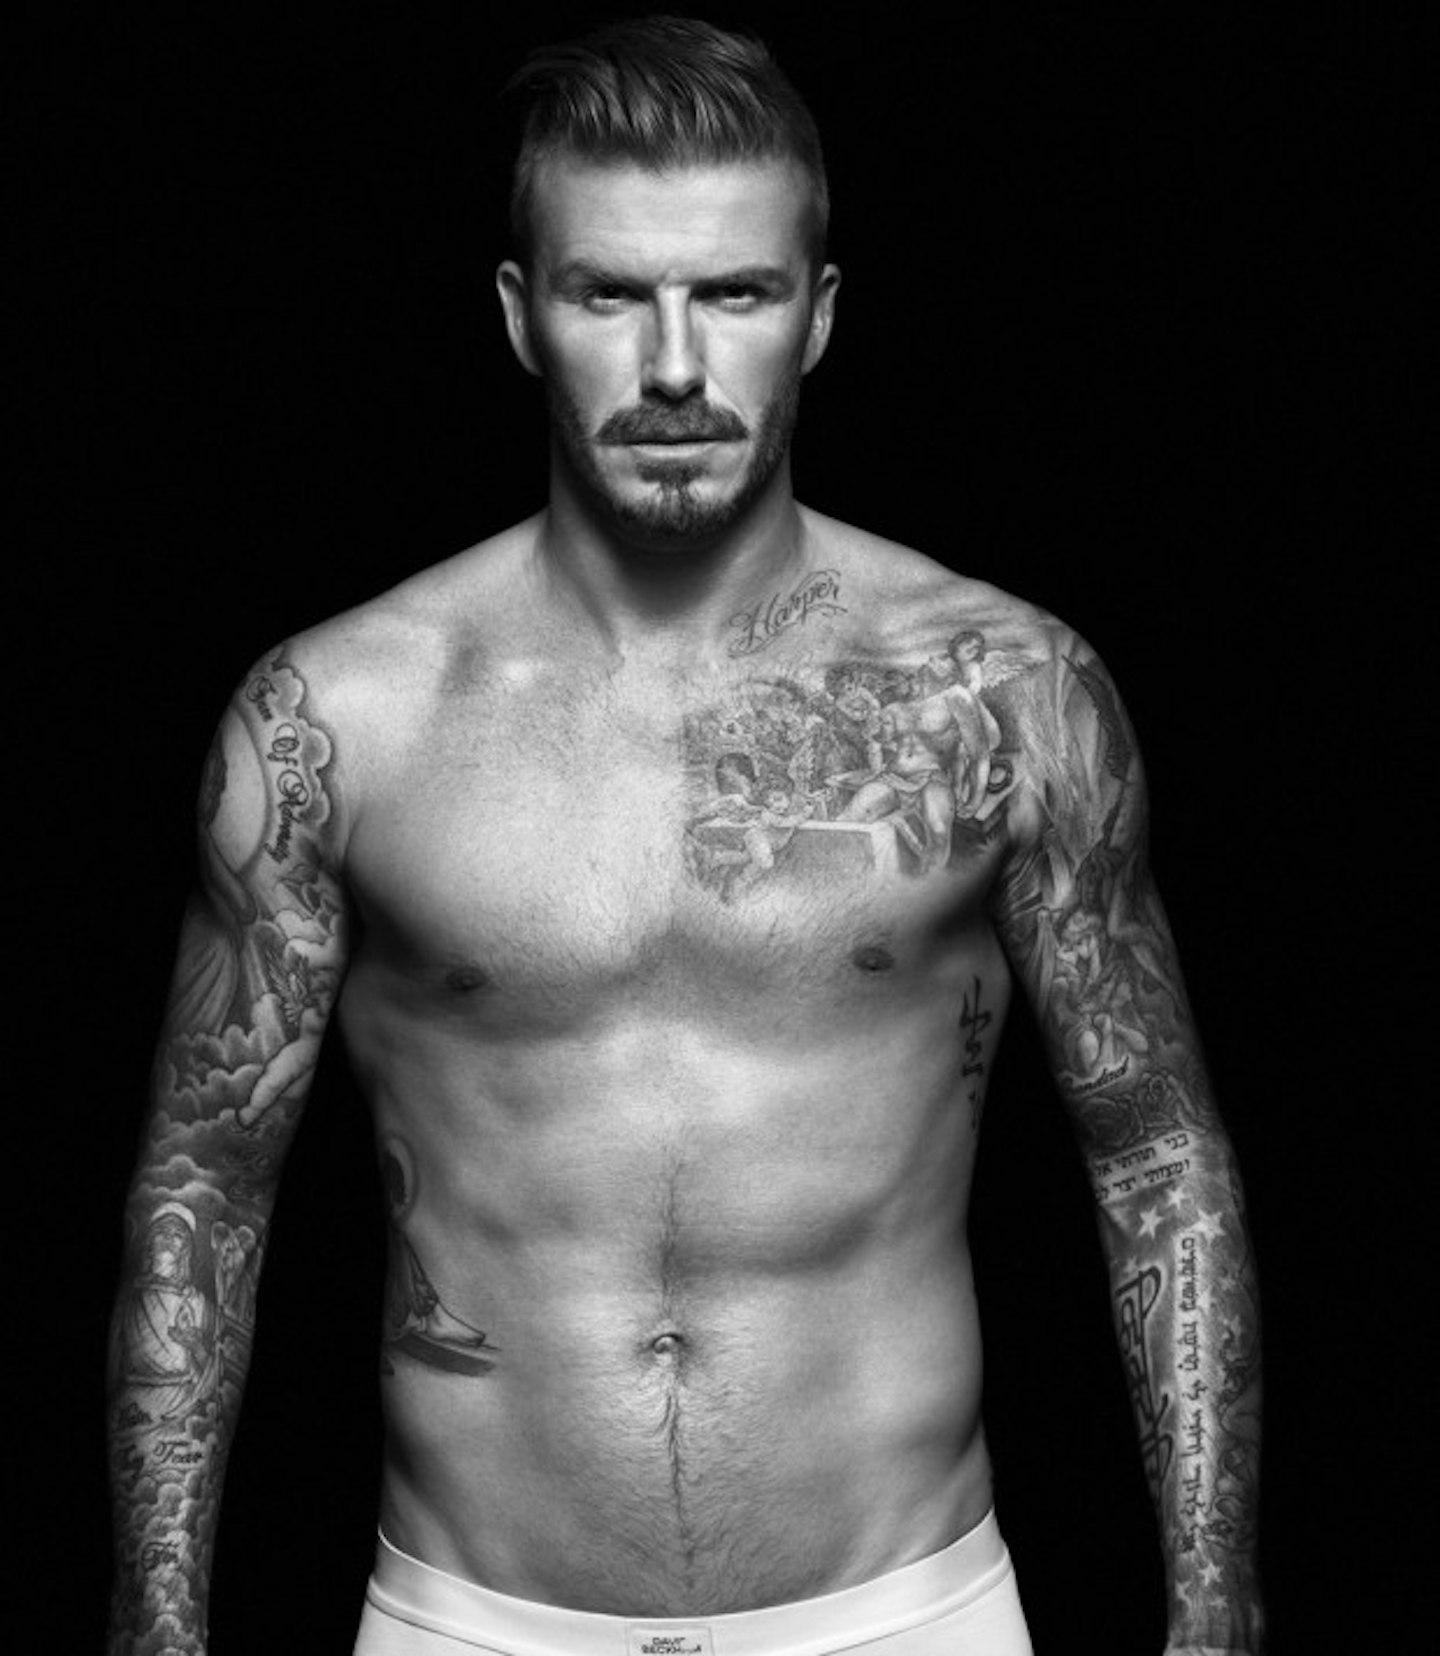 Becks in black and white. Dreamy.